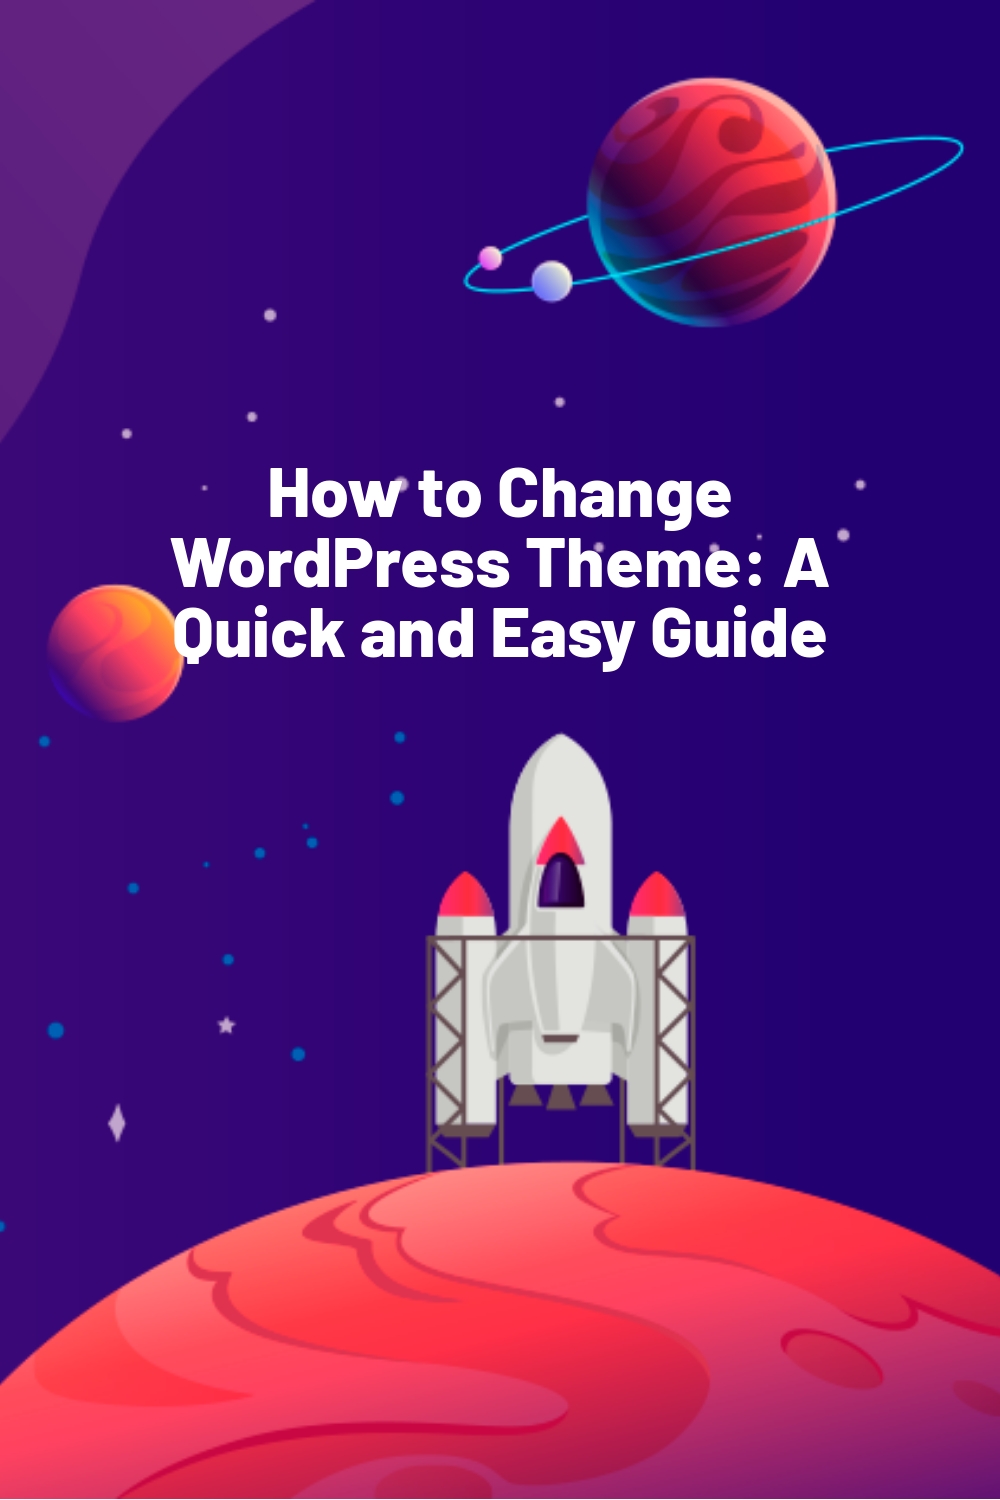 How to Change WordPress Theme: A Quick and Easy Guide